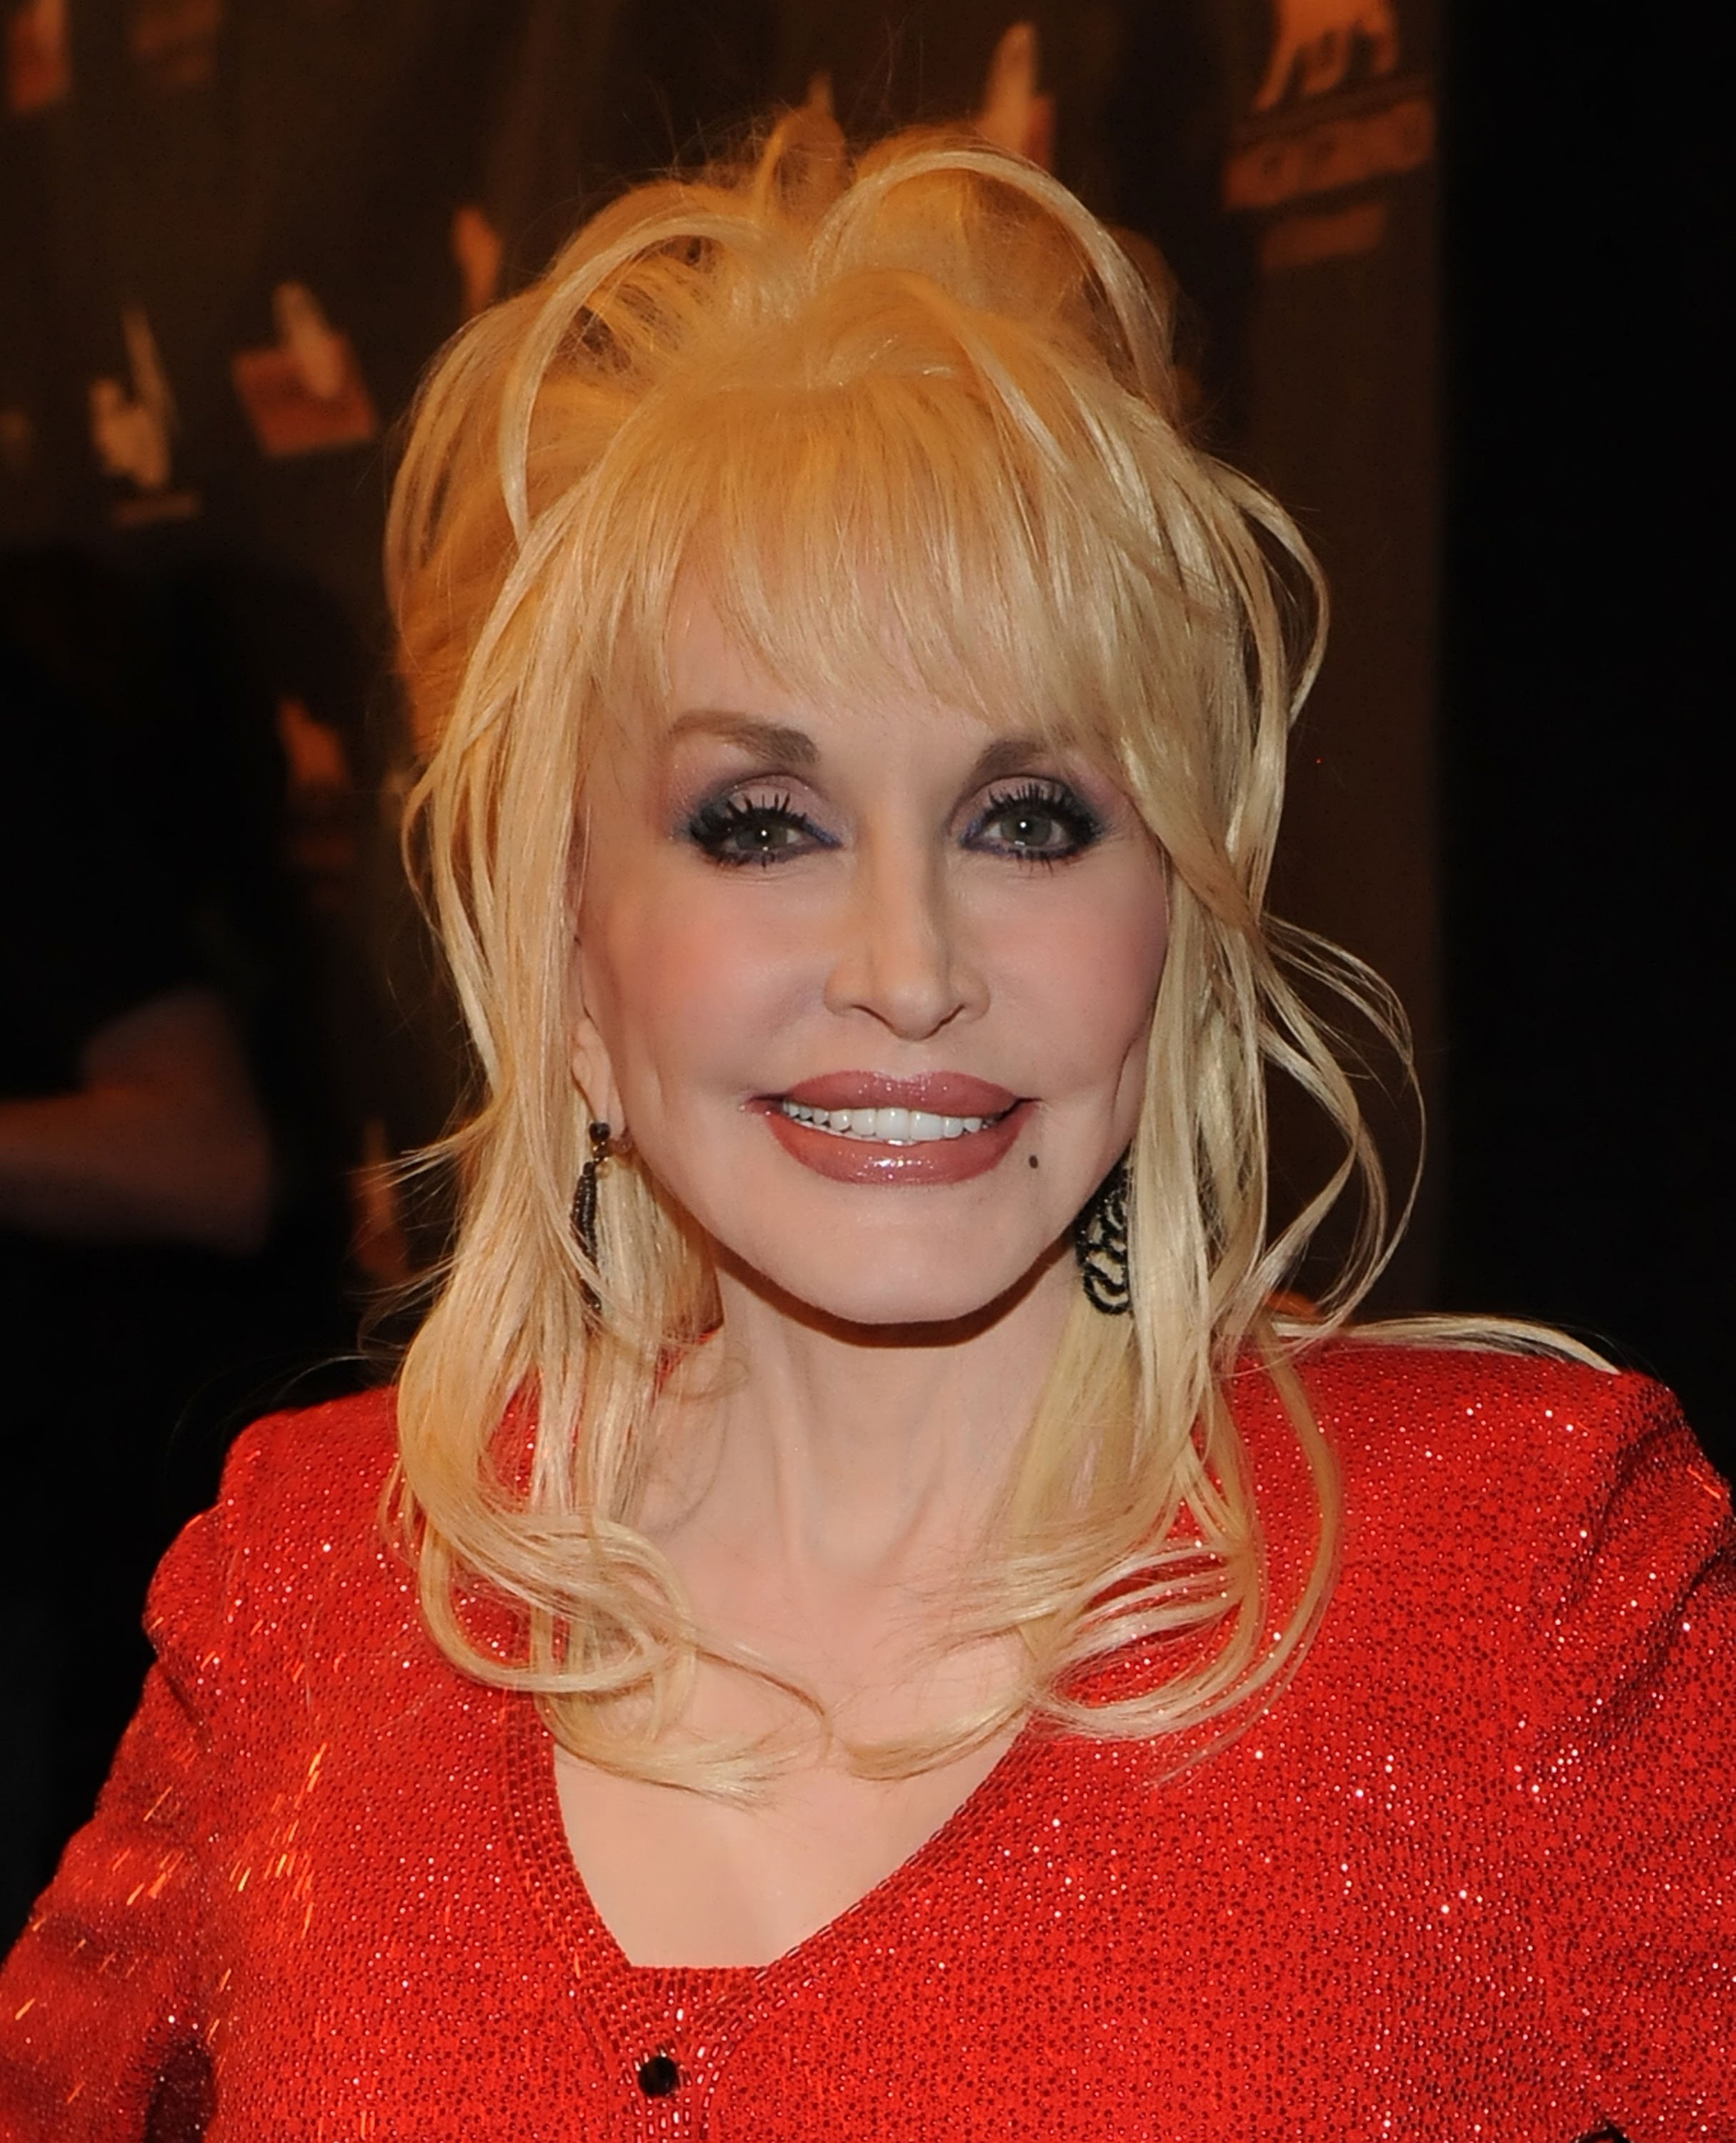 Dolly Parton attends the Kenny Rogers: The First 50 Years awards show at the MGM Grand at Foxwoods on April 10, 2010 in Ledyard Center, Connecticut | Photo: Getty Images